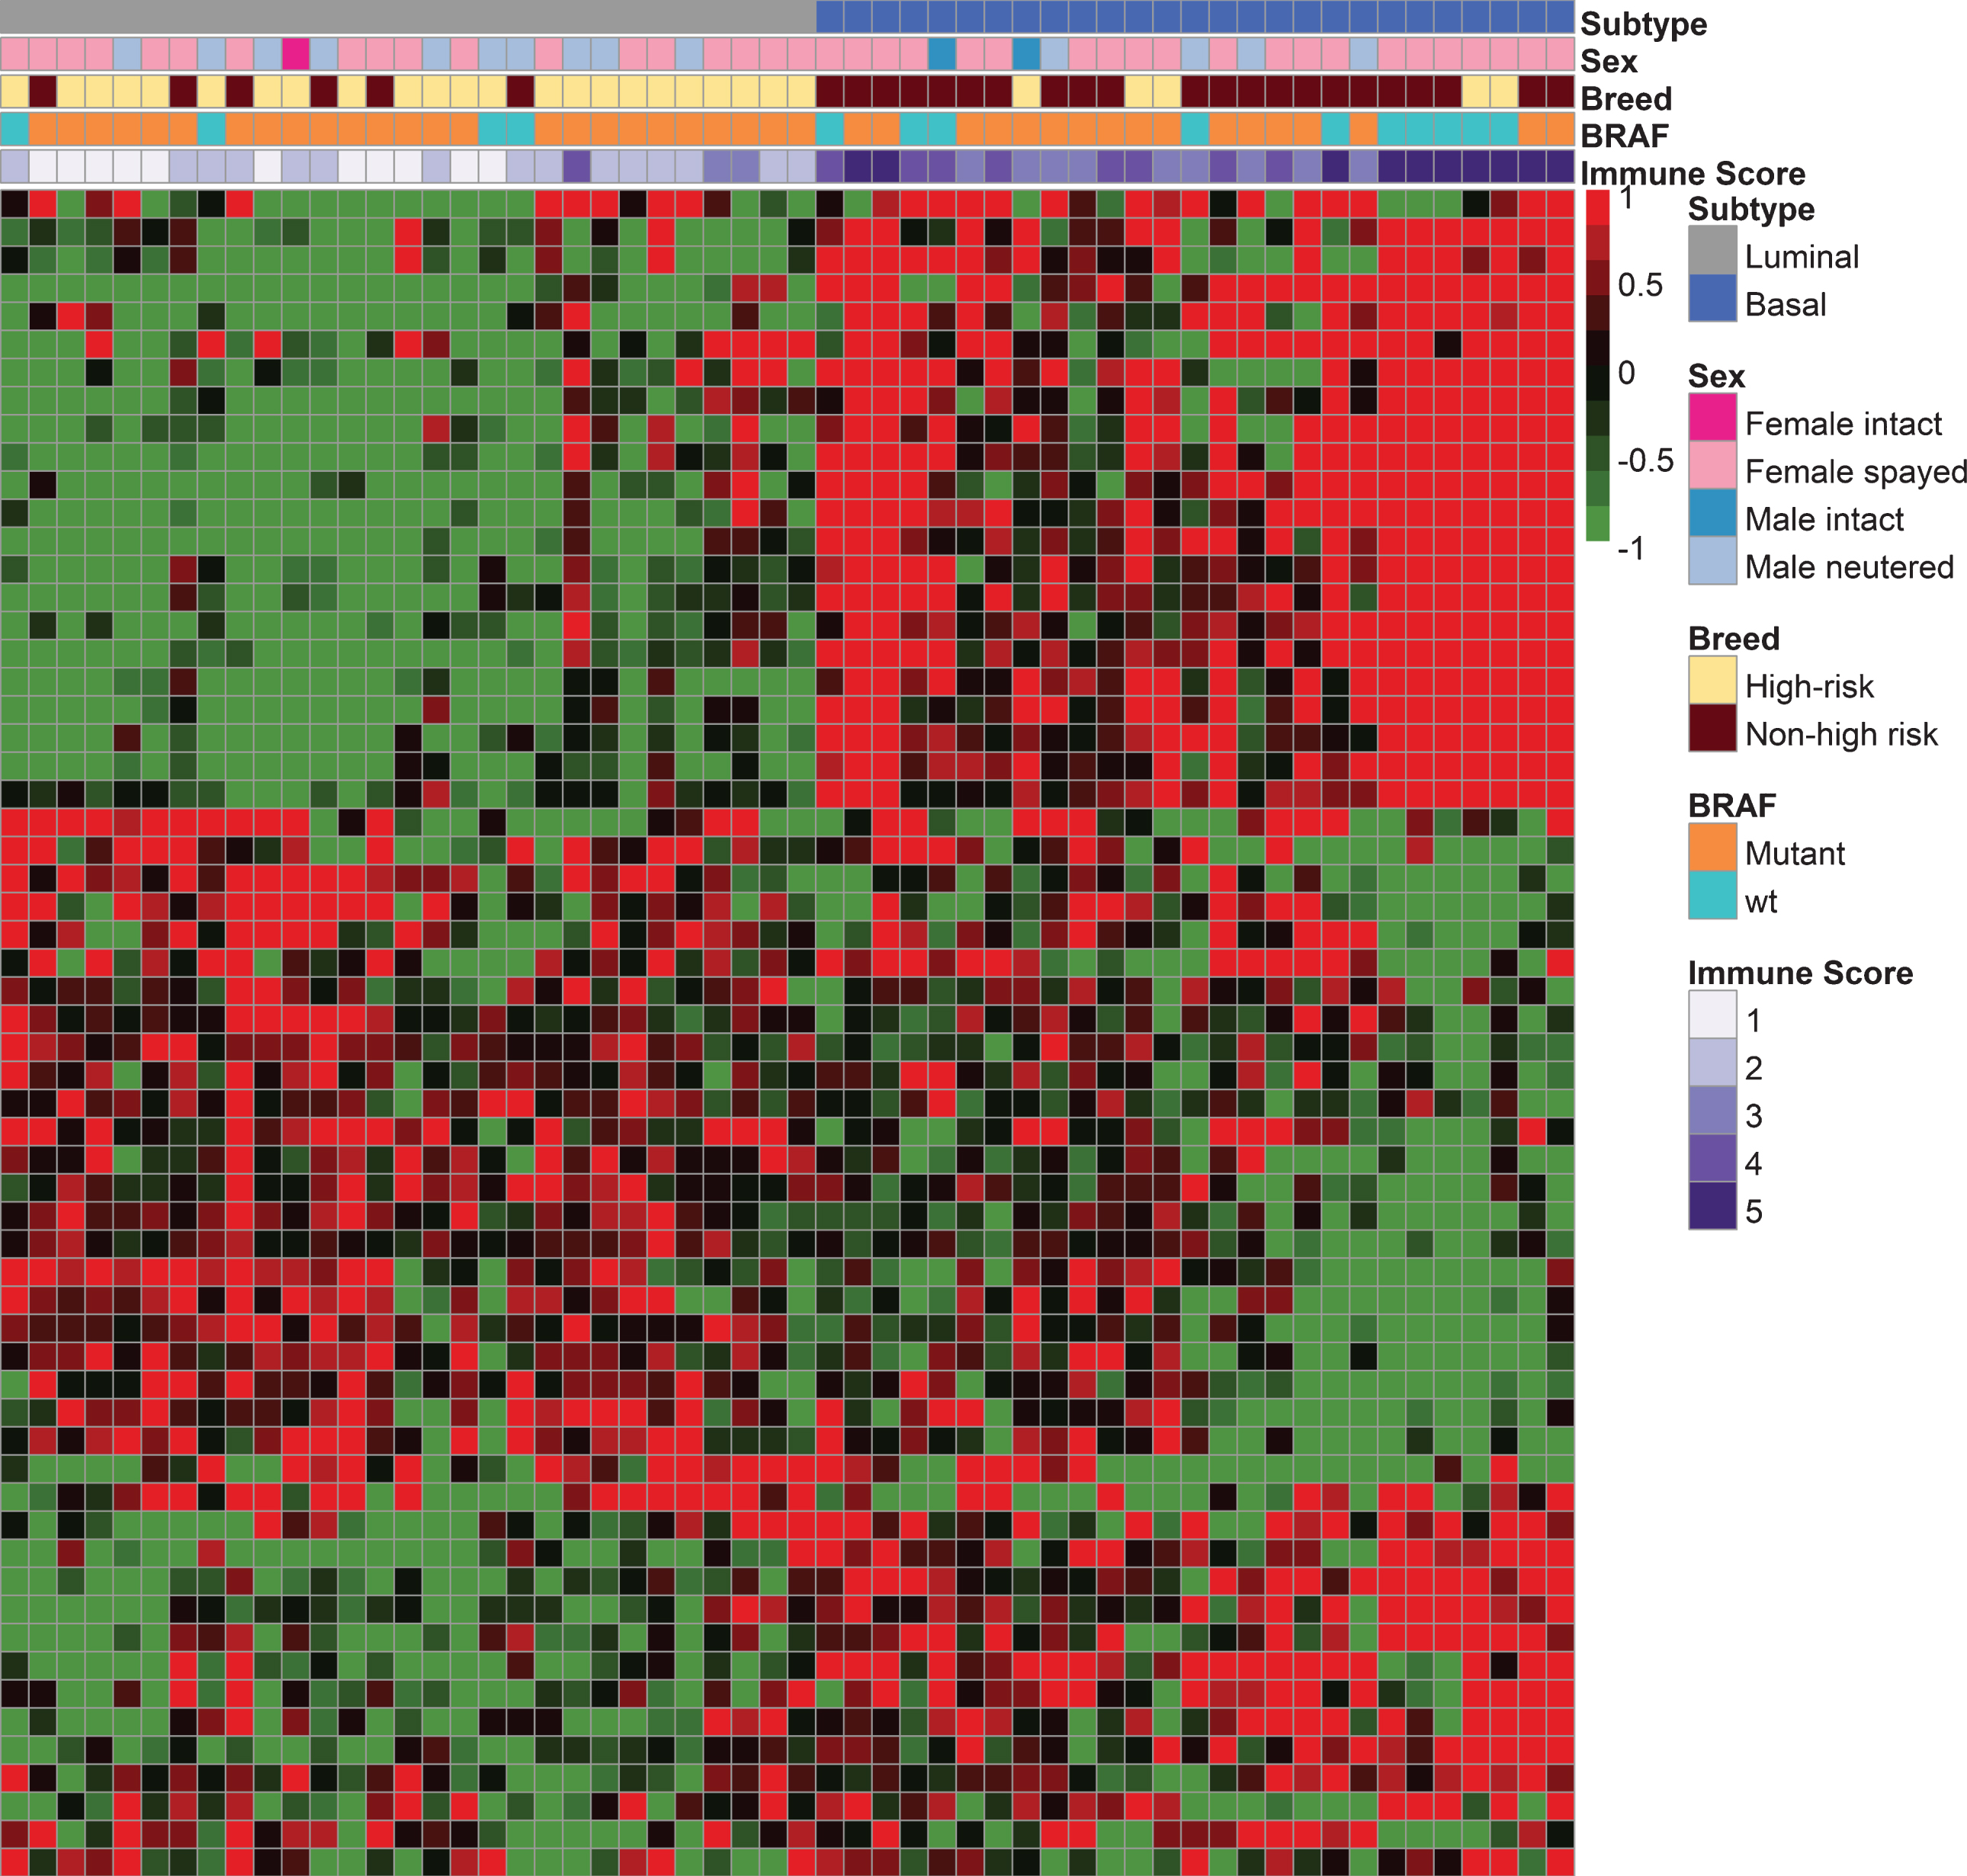 Canine InvUC RNA-seq analyses demonstrating the presence of luminal (n = 29 cases) and basal (n = 27 cases) subtypes. A previously published 60-gene class prediction model was used for subtype assignment [21] of canine InvUC samples (n = 56) with comparison to canine normal bladder mucosa samples from dogs with no evidence of bladder disease (n = 4). In the heatmap, each column represents data from one sample, and each row represents a specific gene. The genes are listed in Supplementary Table S1 in the same order as they appear in the heatmap. Information regarding subtype, sex, breed, BRAF status (mutated or not), and immune score is provided in the color bars above the heatmap. Note the segregation of tumor samples into two main groups identified as luminal and basal, with multiple subgroups within each subtype. Dogs in breeds with high genetic risk for InvUC were more likely to have luminal tumors, and dogs in other breeds to have basal tumors (OR 0.06 for basal tumors in high-risk breeds, 95%CI 0.01 –0.37, P = 0.002). Basal tumors were strongly associated with immune infiltration (OR 52.22, 95%CI 4.68–582.38, P = 0.001) as indicated by purple bars, with darker shades indicating higher T-cell infiltration. There was an association between the BRAFV595E mutation and the luminal subtype, and between wild type BRAF and the basal subtype (OR 0.27 for basal tumors having BRAFV595E, 95%CI 0.07 –1.01, P = 0.0424).